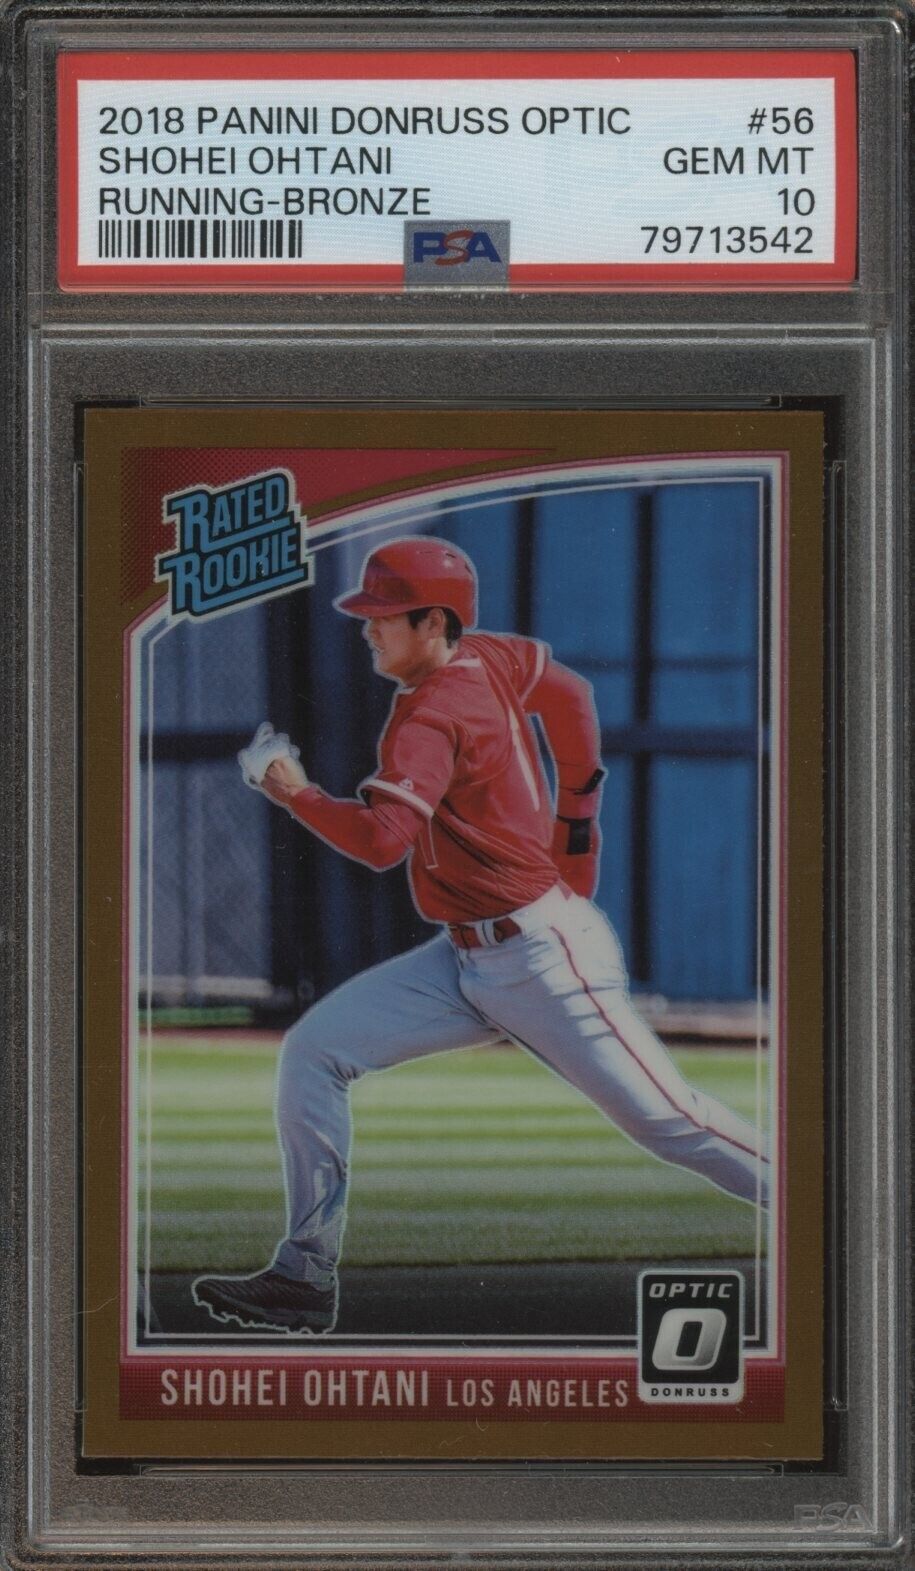 prizm Shohei Ohtani - On Ebay - Multiple Results on One Page